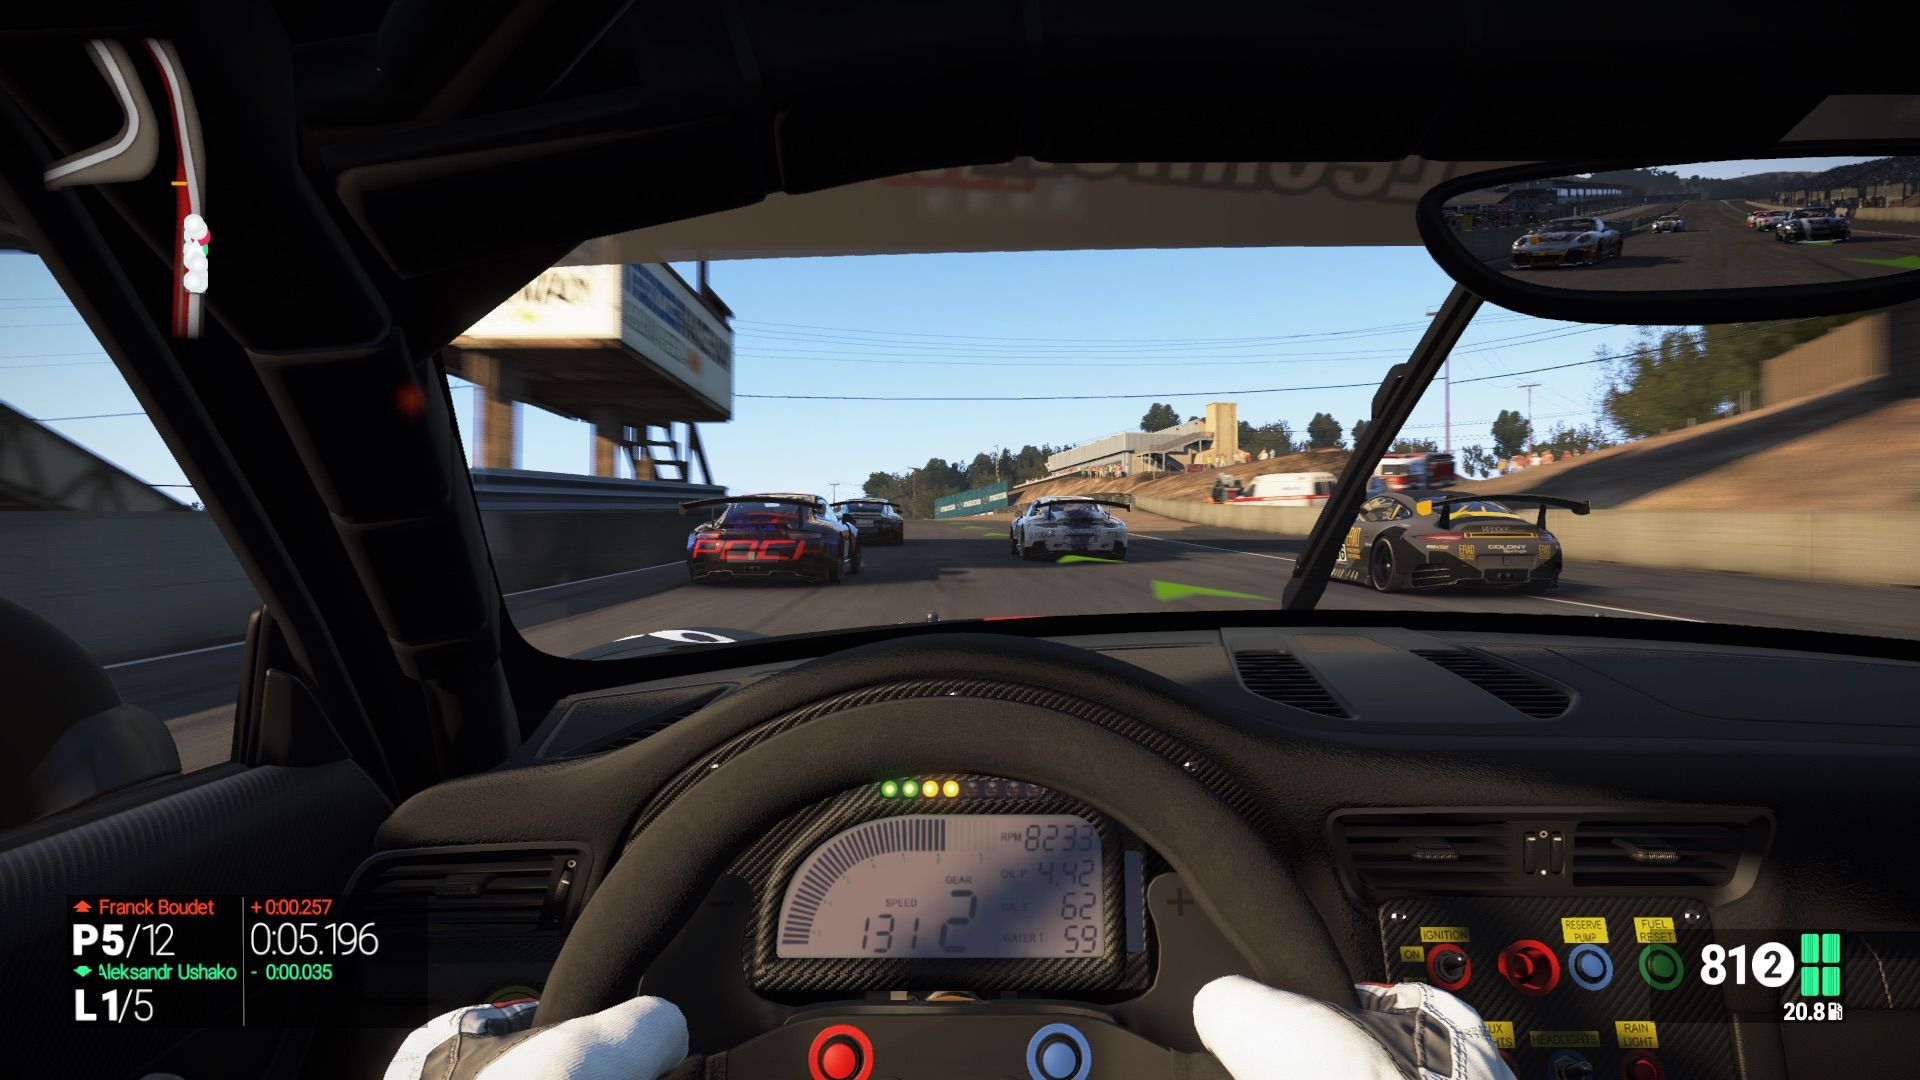 which version of project cars pc